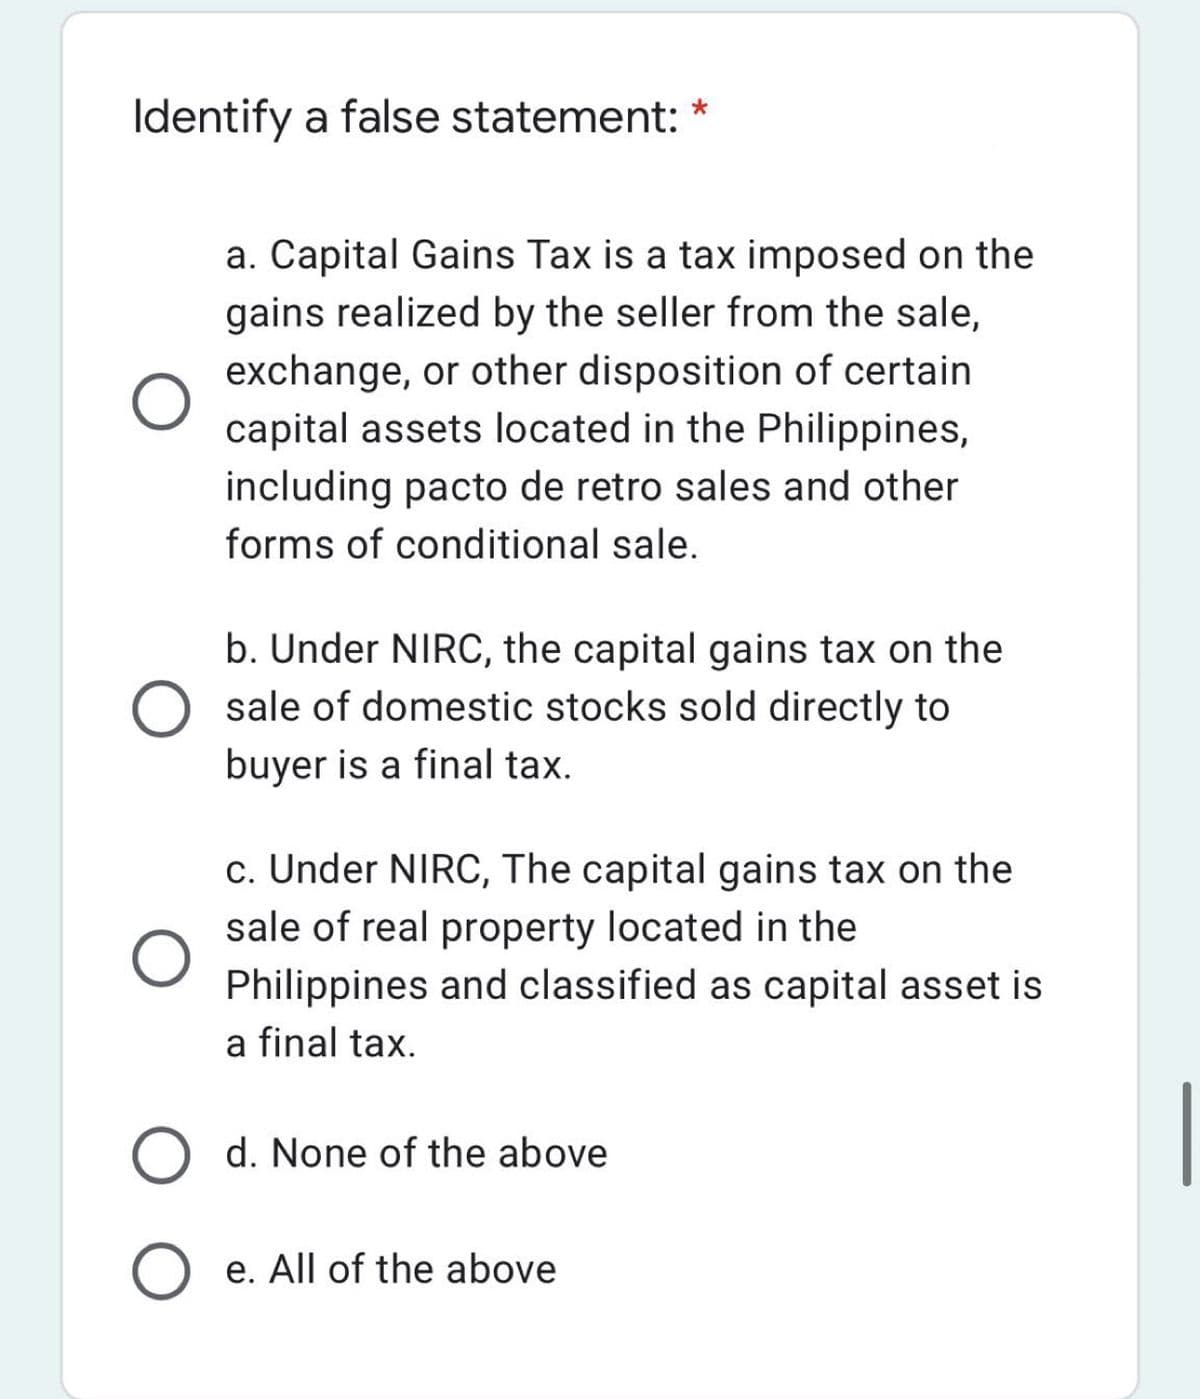 Identify a false statement:
a. Capital Gains Tax is a tax imposed on the
gains realized by the seller from the sale,
exchange, or other disposition of certain
capital assets located in the Philippines,
including pacto de retro sales and other
forms of conditional sale.
b. Under NIRC, the capital gains tax on the
sale of domestic stocks sold directly to
buyer is a final tax.
c. Under NIRC, The capital gains tax on the
sale of real property located in the
Philippines and classified as capital asset is
a final tax.
O d. None of the above
O e. All of the above
